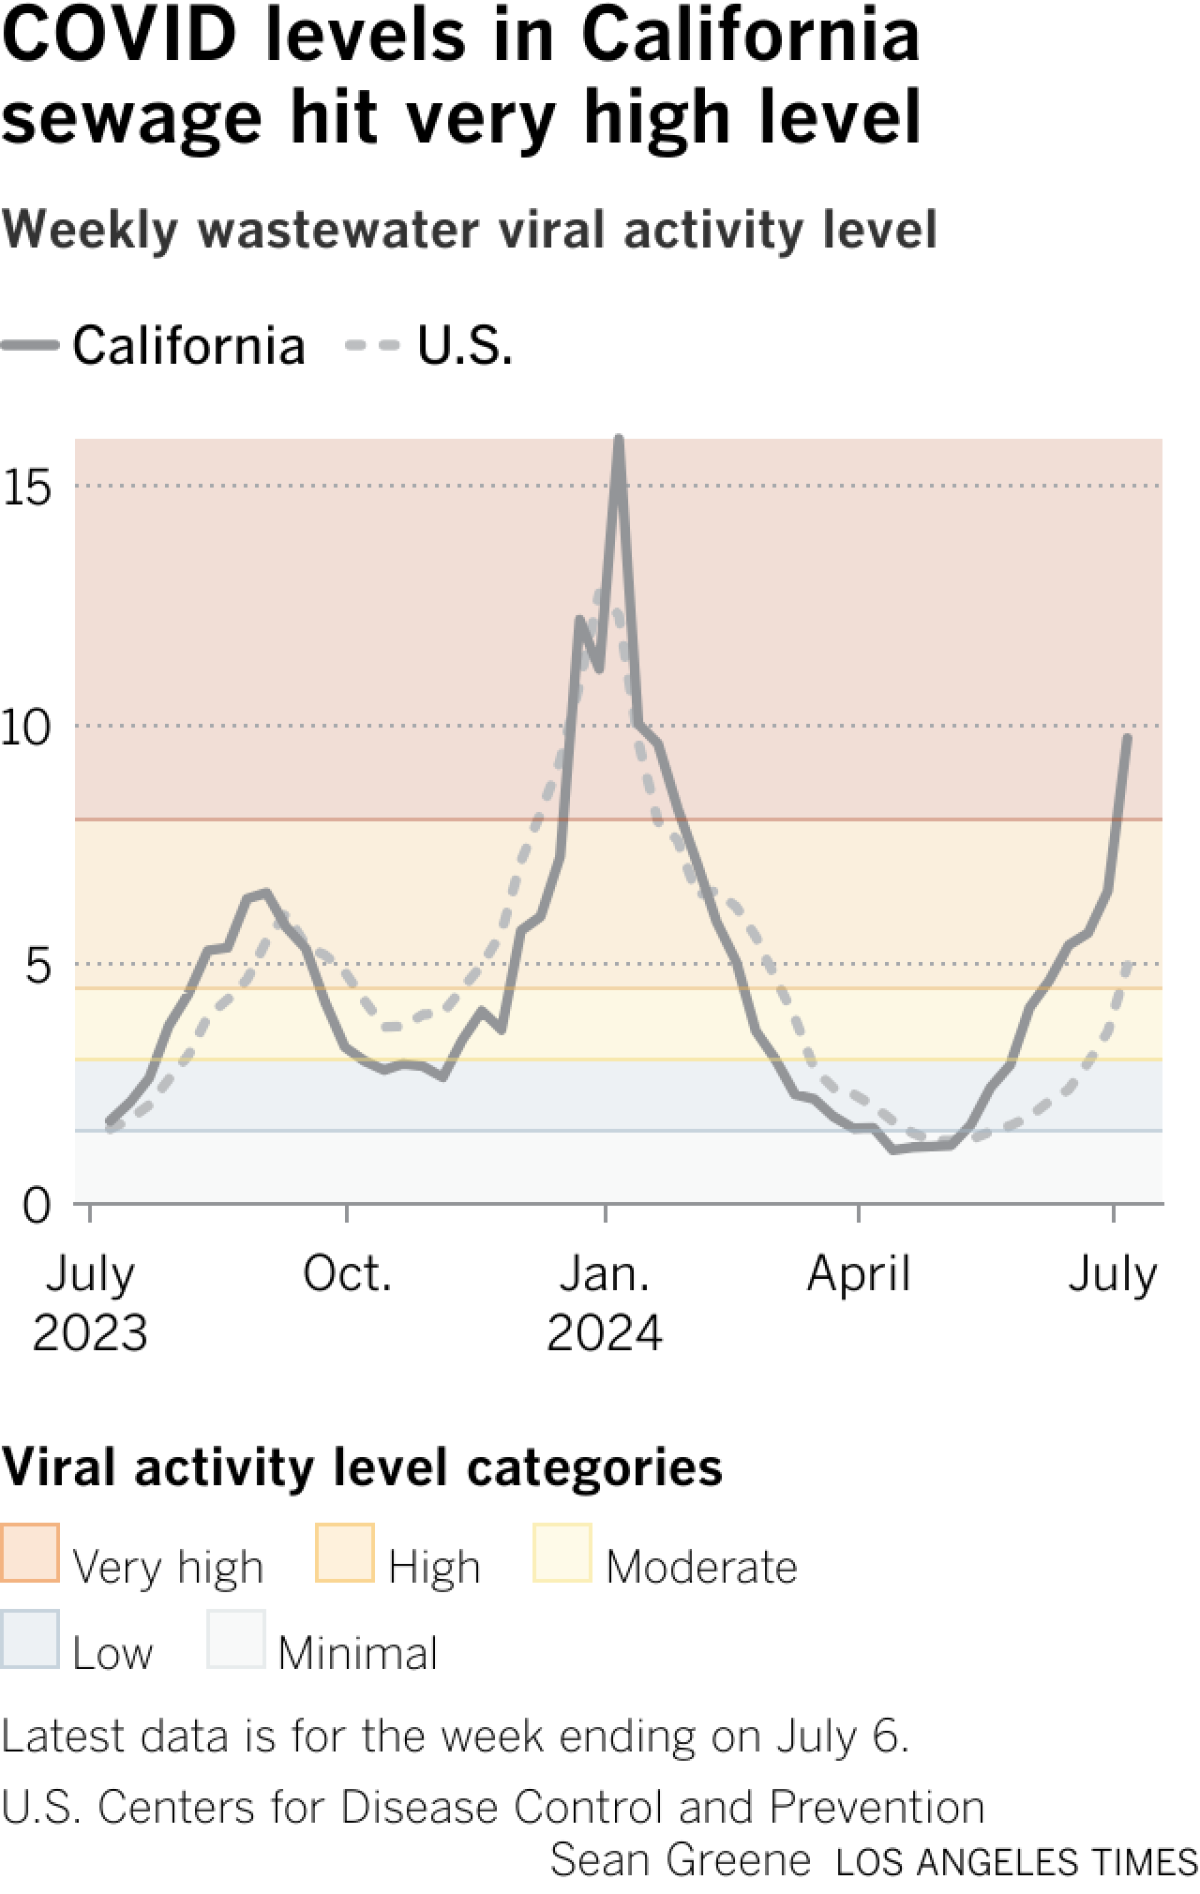 Line chart shows COVID levels in wastewater. For the week ending on July 6, the California level is 9.72, considered very high. Nationwide, the level is high at 4.97.